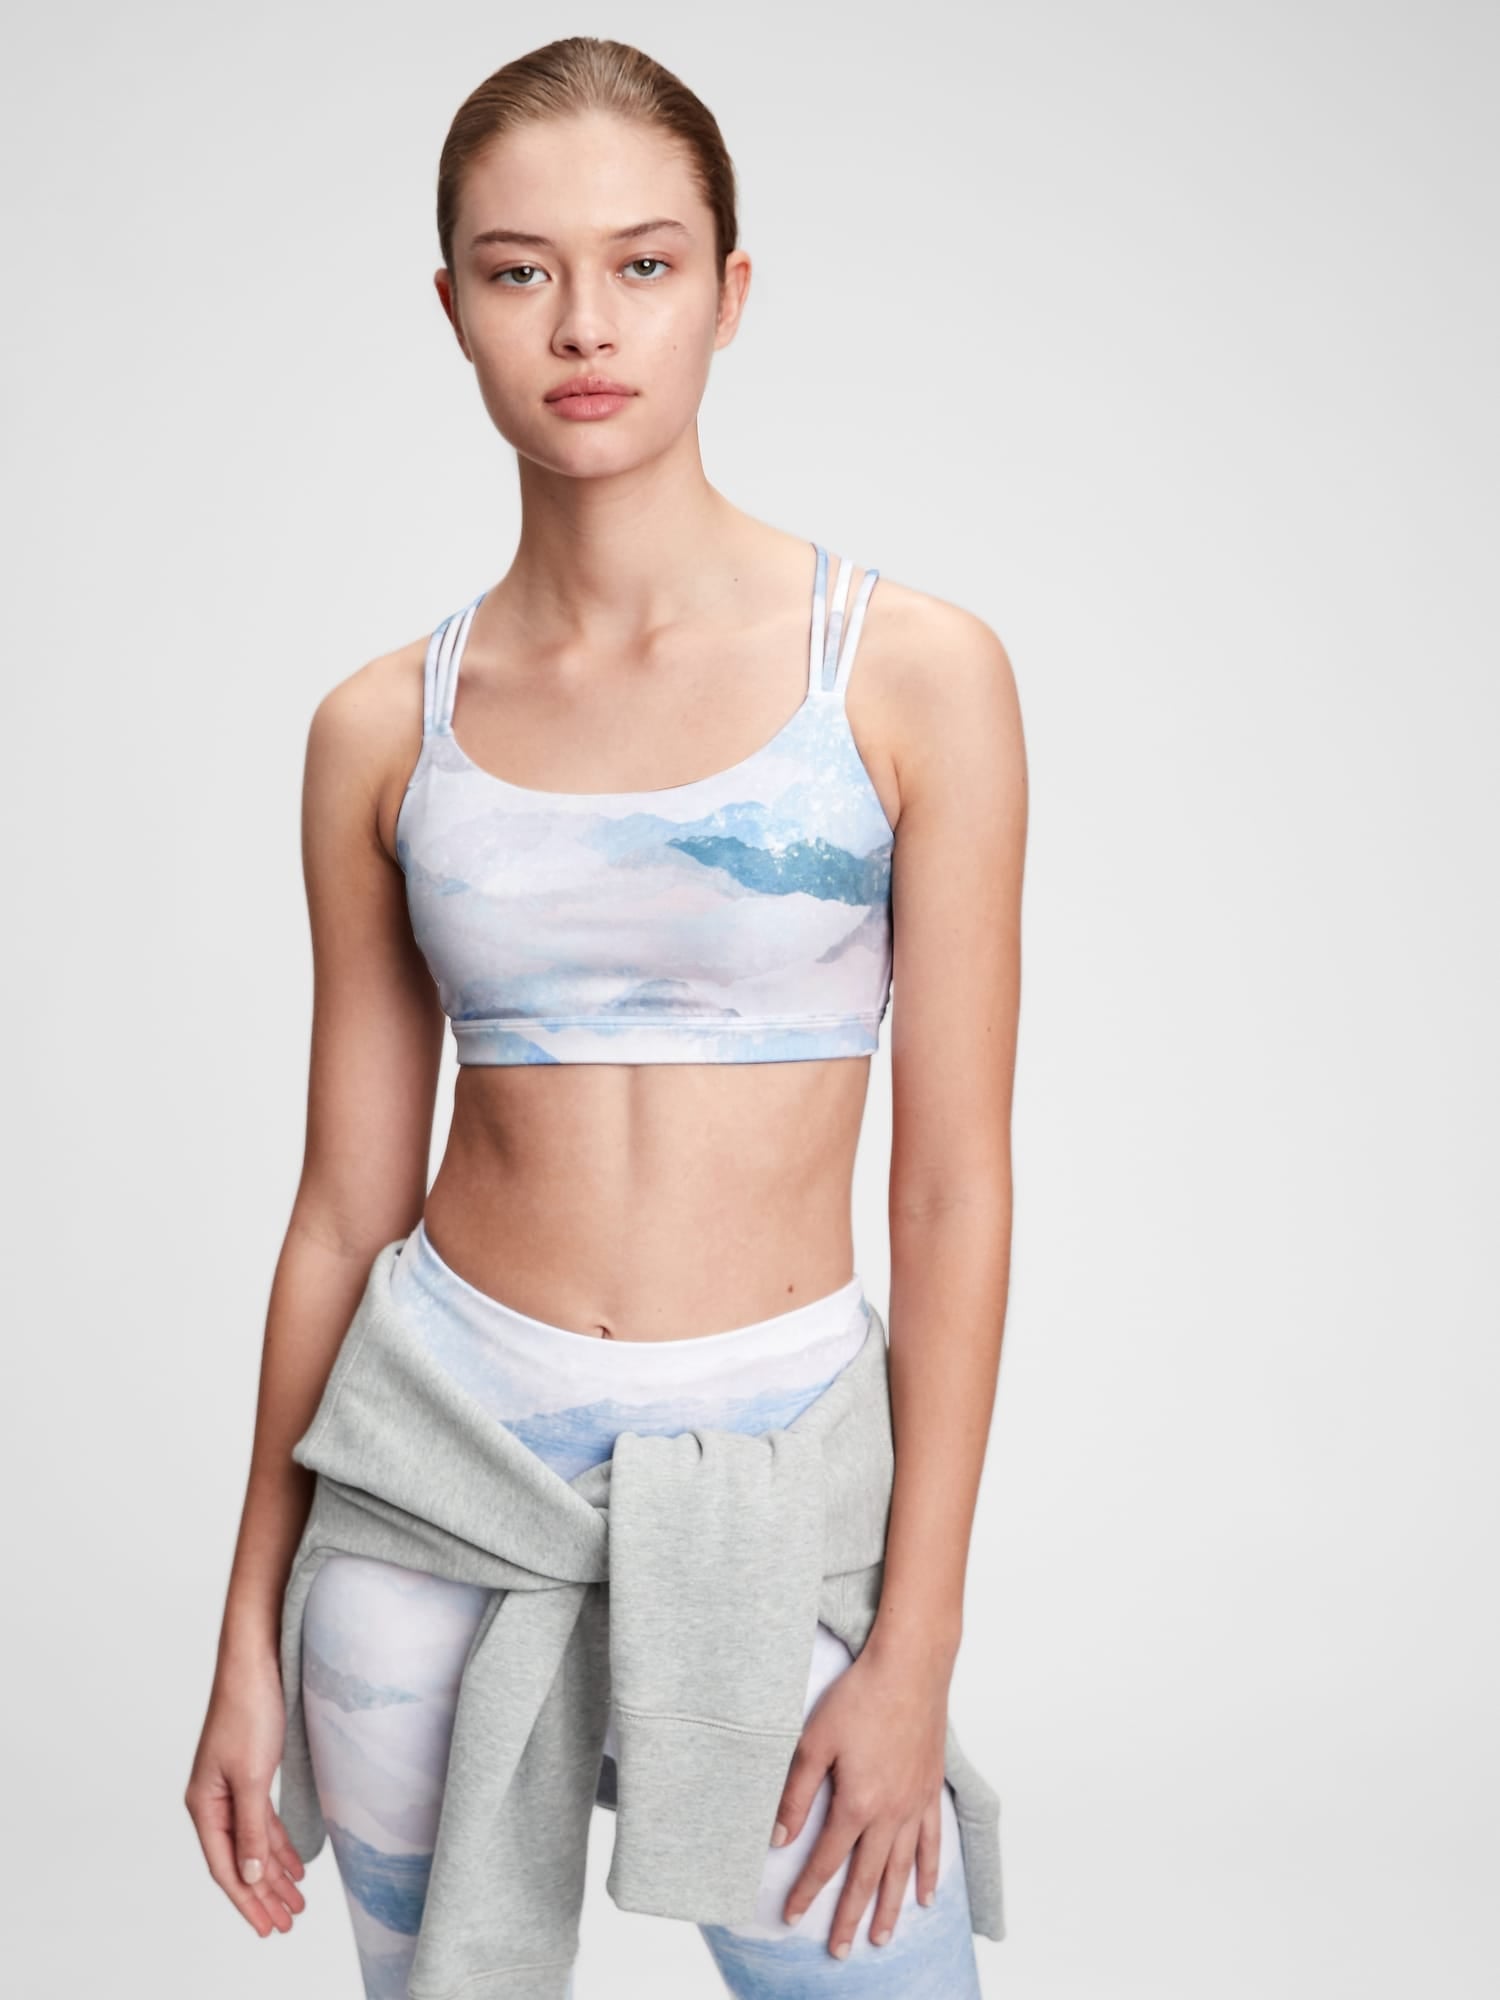 Best New Workout Clothes From Gap, 2021 Guide